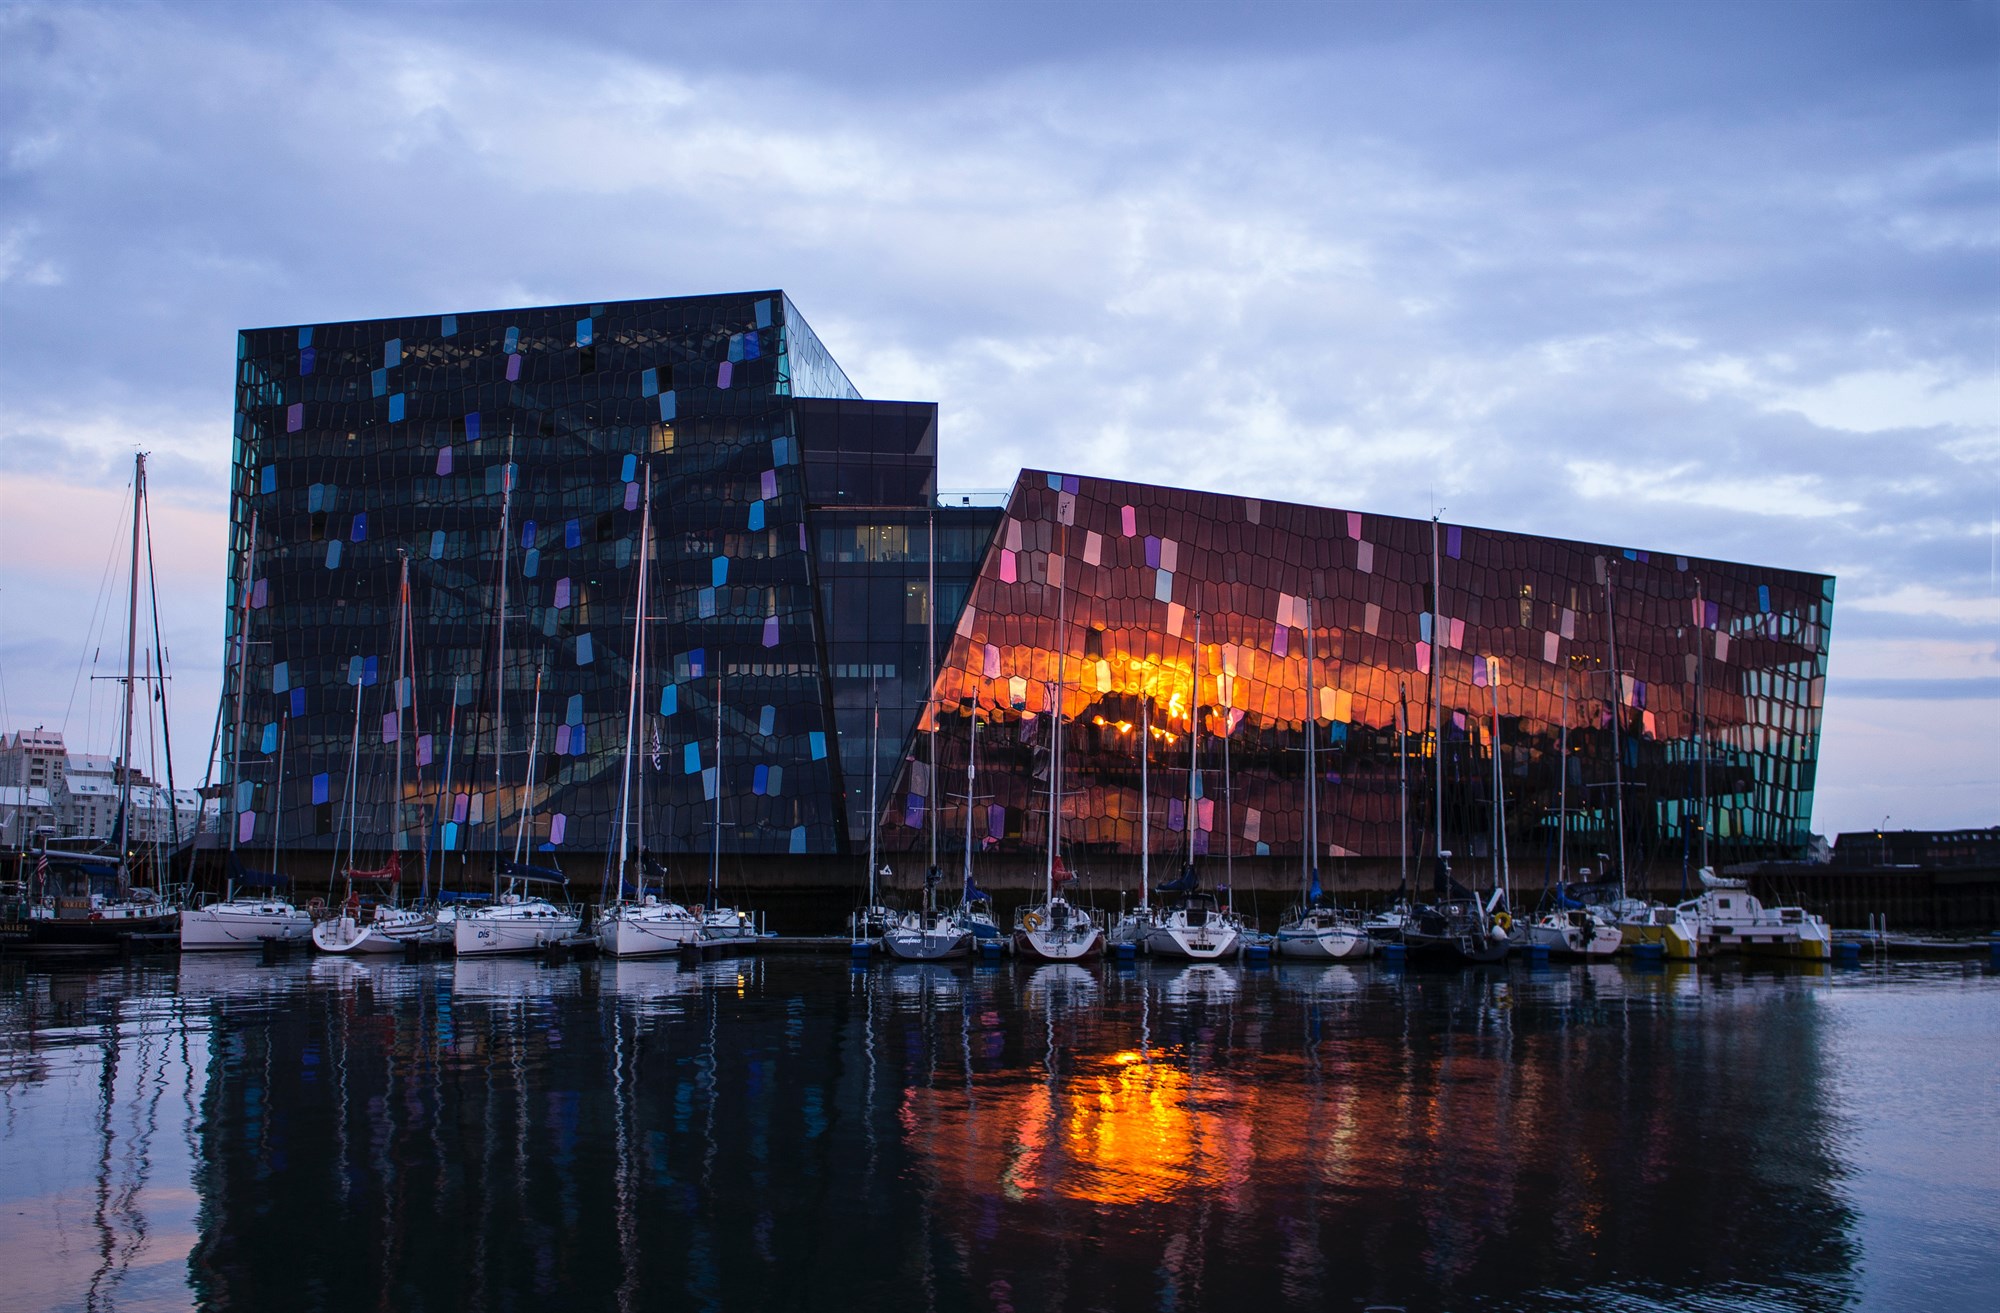 Harpa Concert Hall in Iceland at dusk, surrounded by sailing boats 